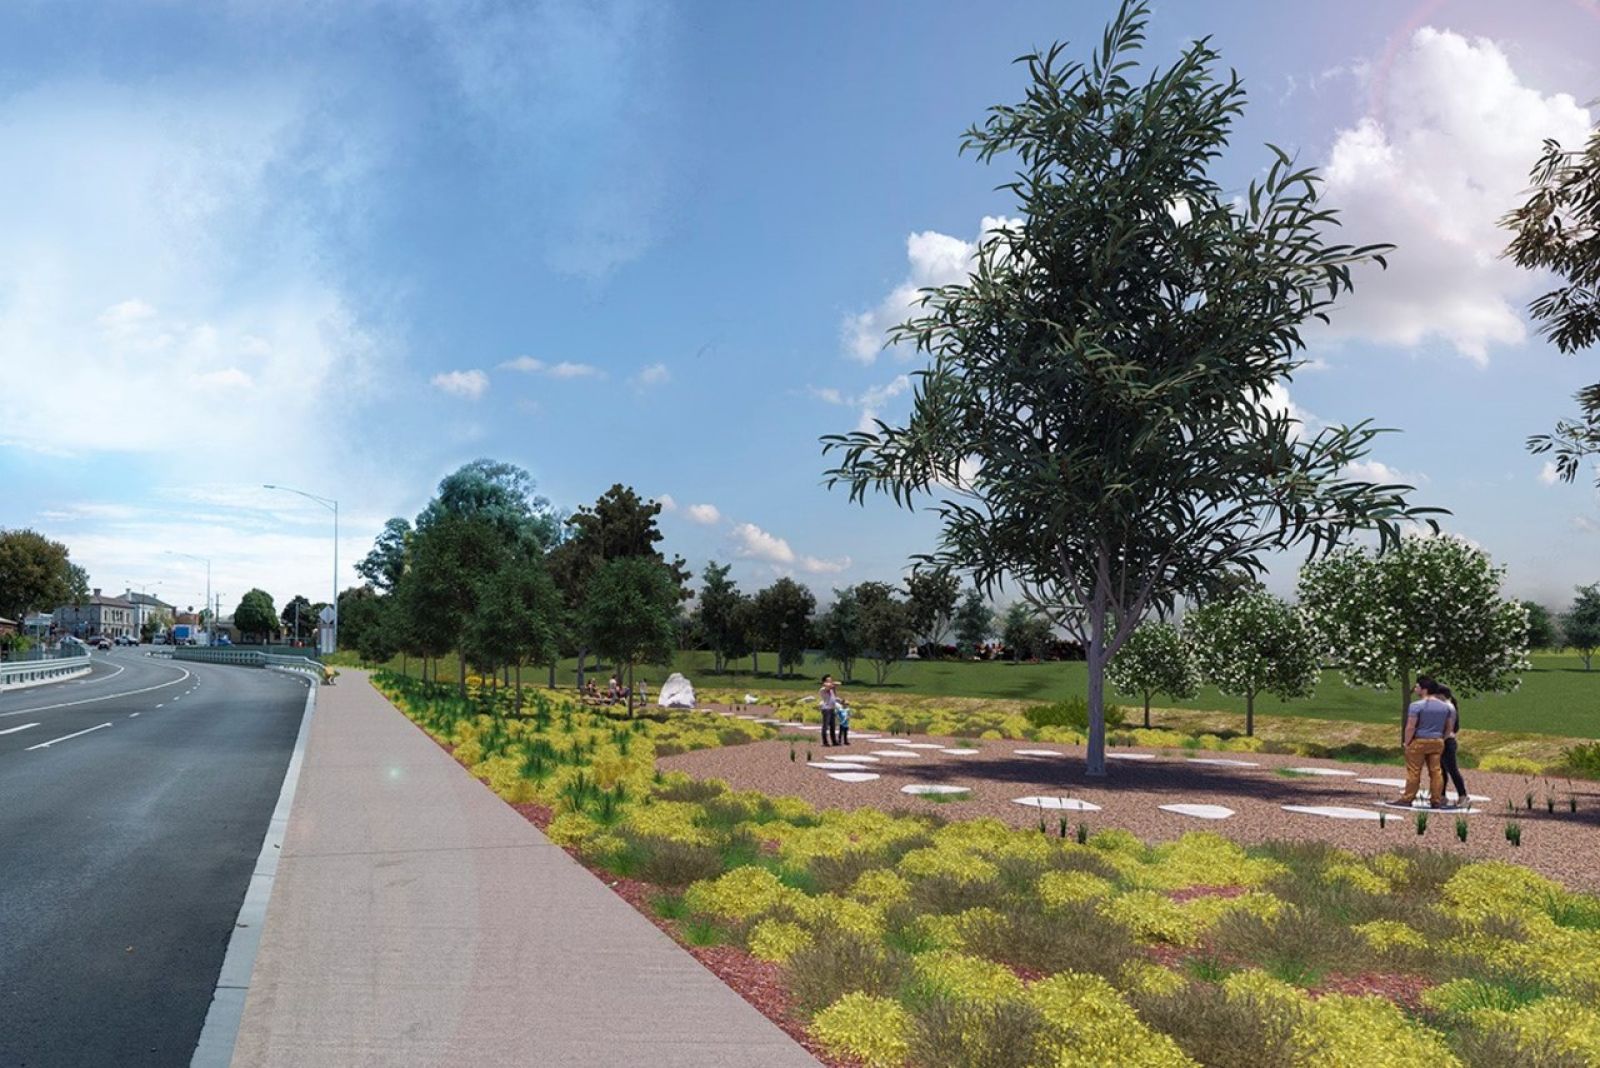 Artist’s impression of landscaping once the trees are established.